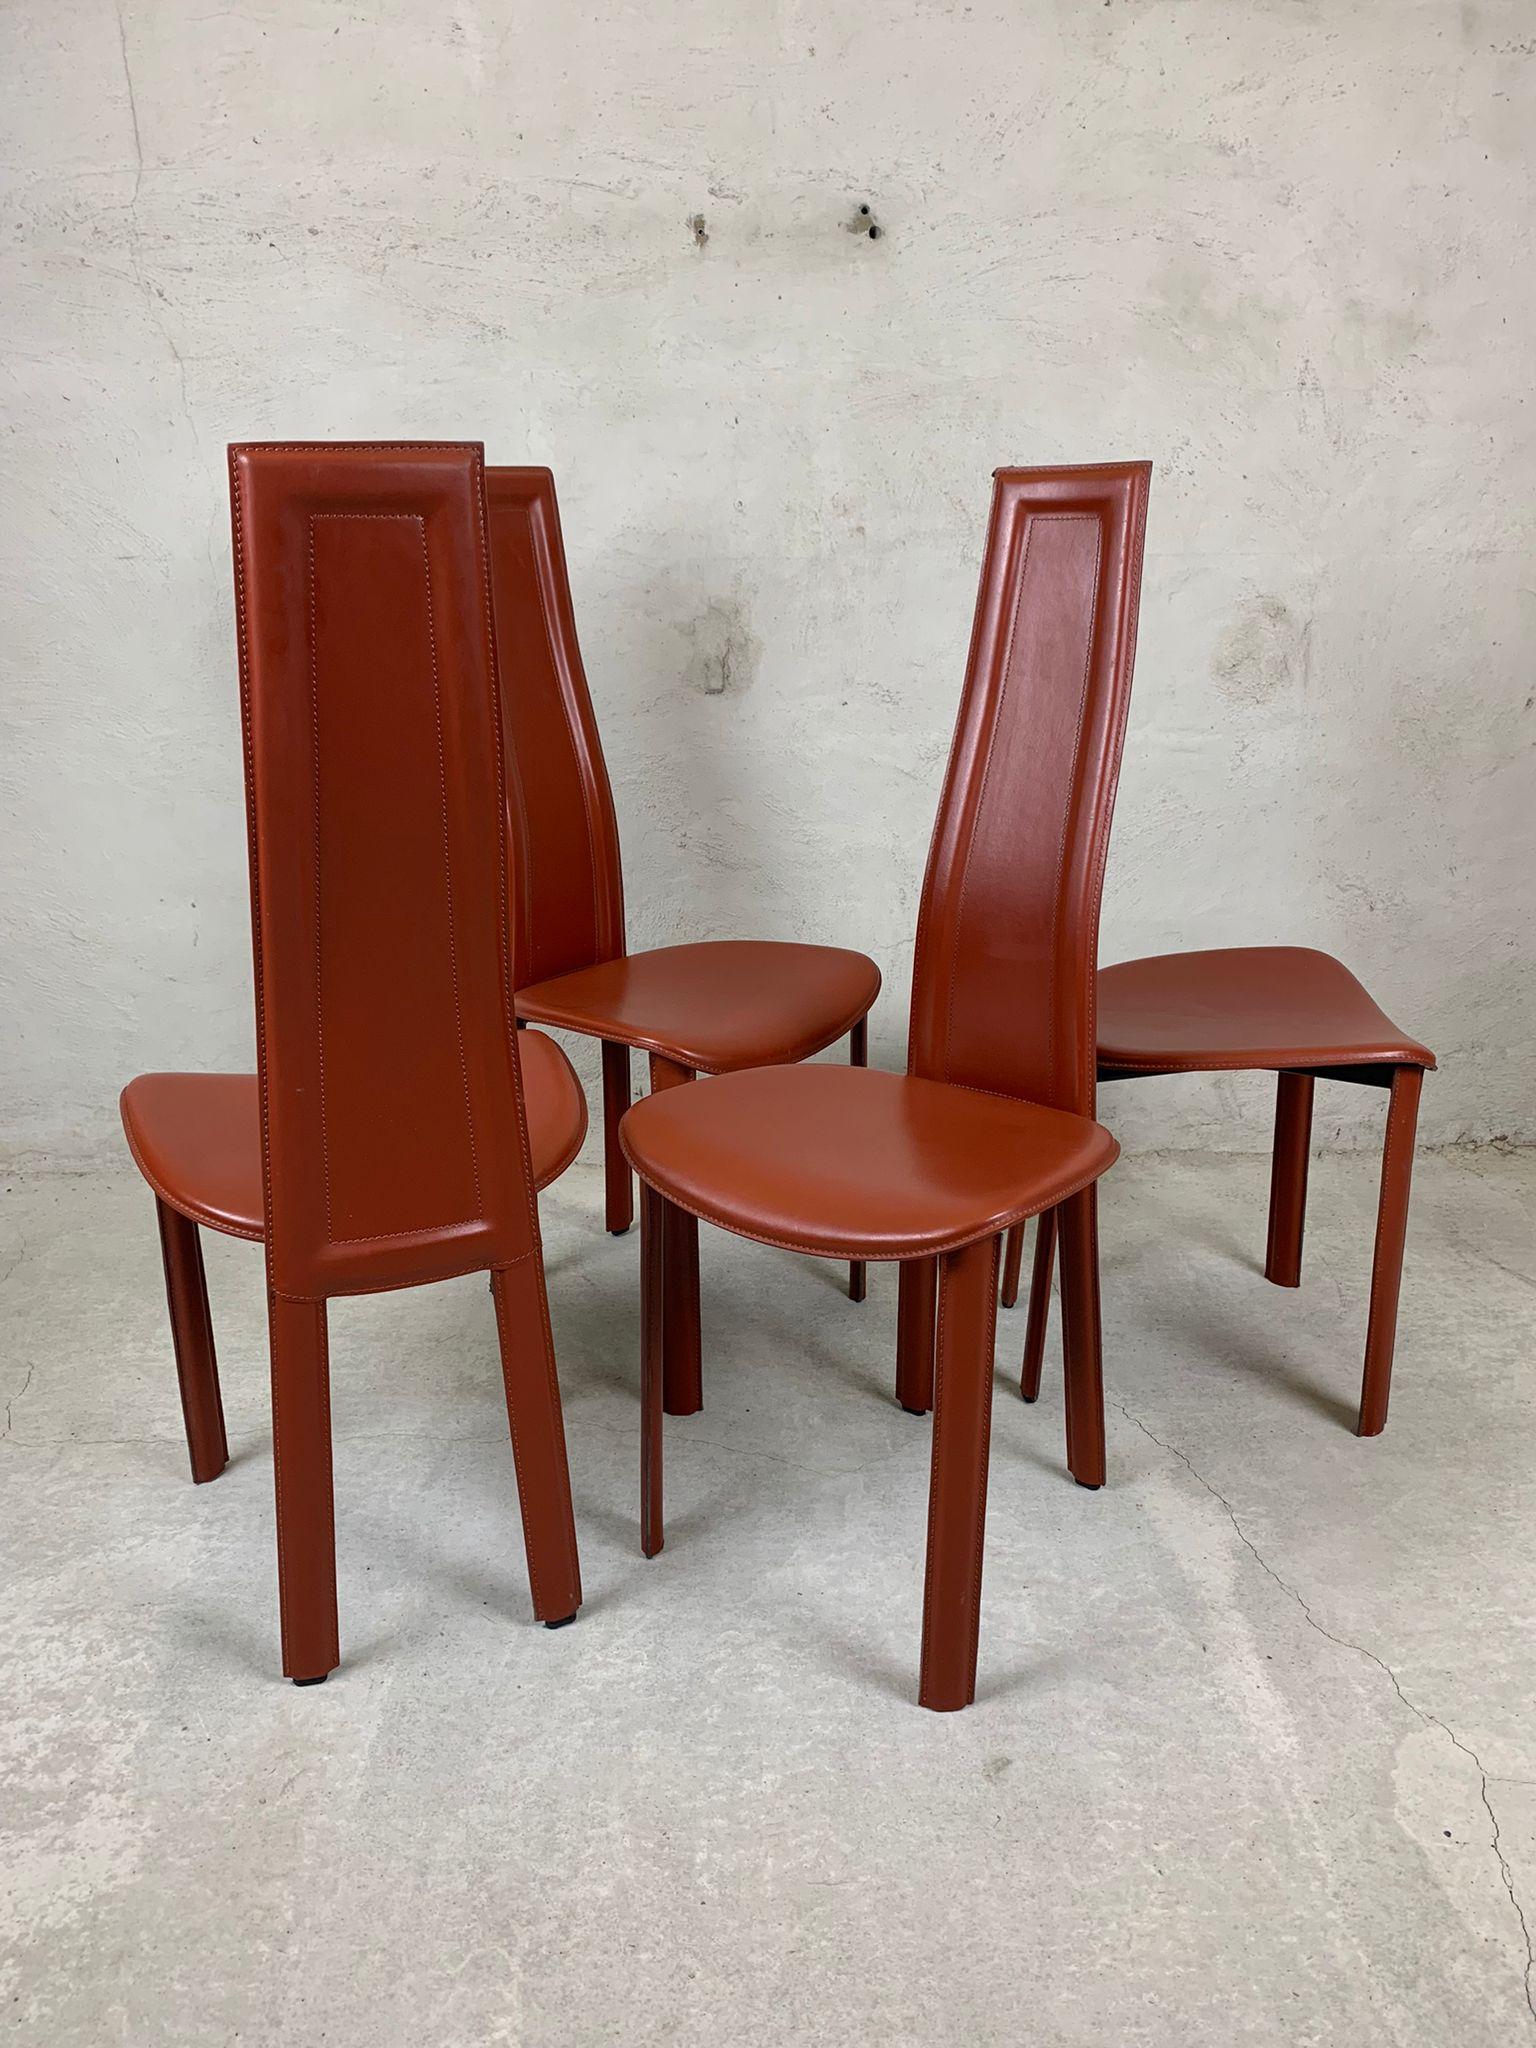 Italian Set Of 6 High Back Dining Room Chairs By Arper For Sale